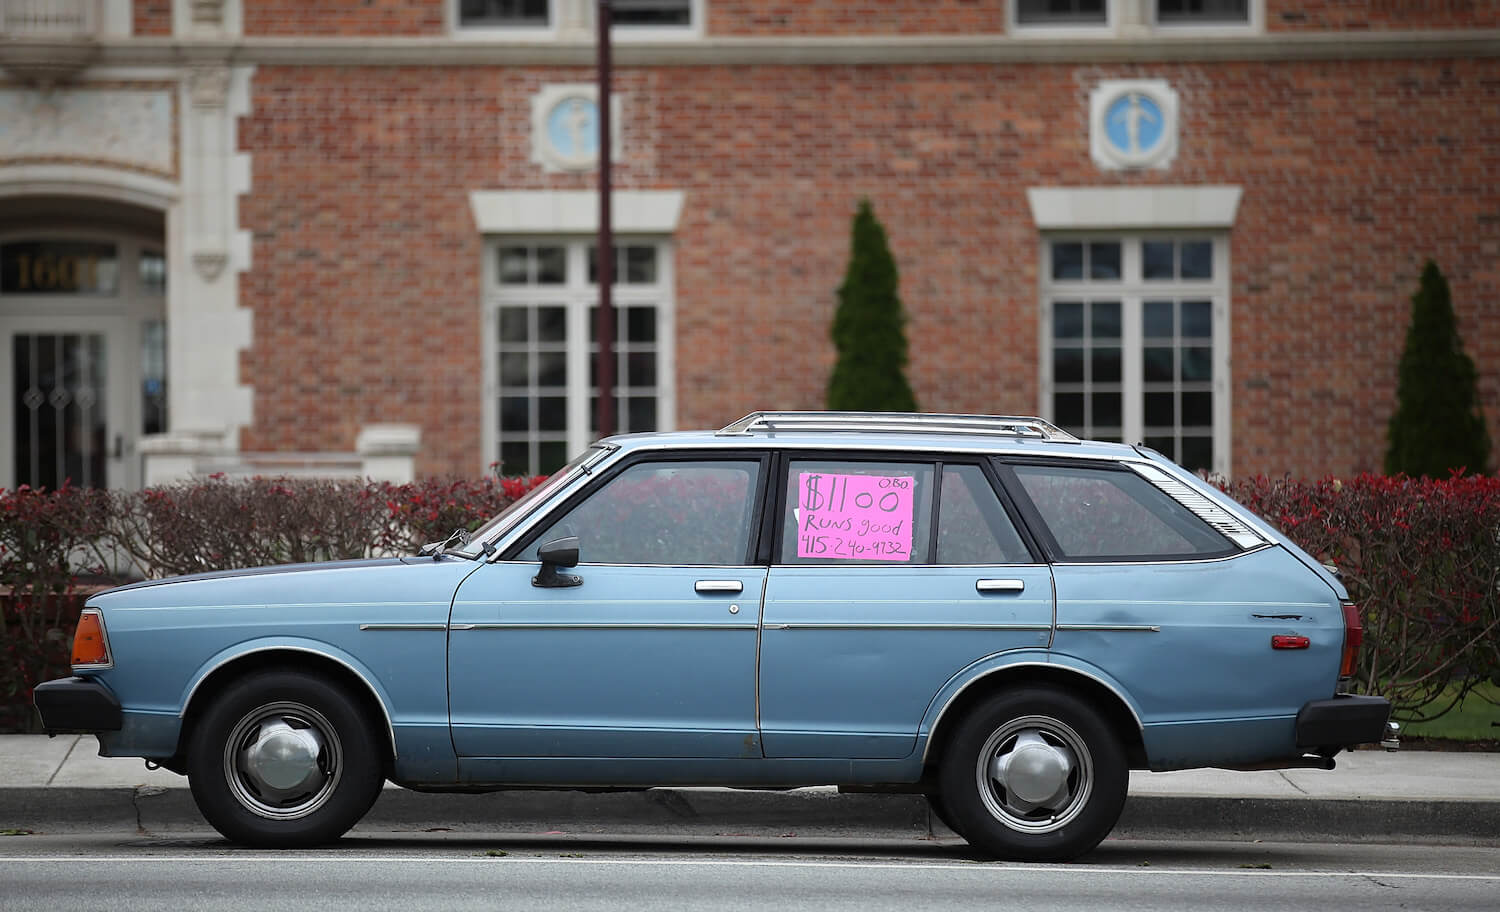 A blue station wagon parked on the street with an $1100 sign and phone number for used car buyers, a brick house in the background.